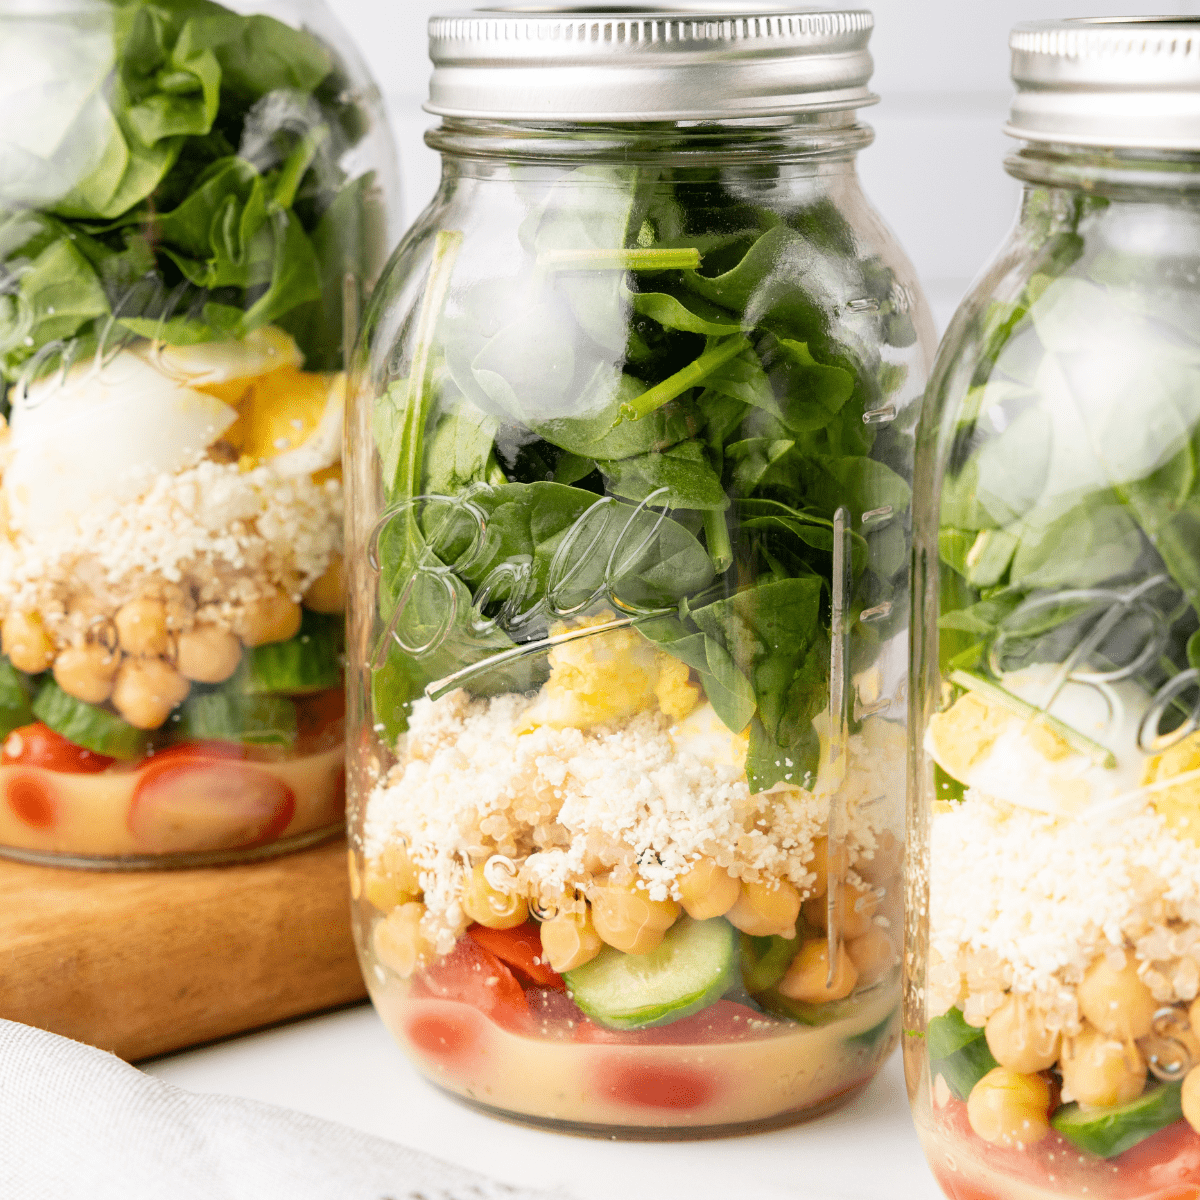 Protein Salad in a Jar Feature Image. Close up image on the salad layered into mason jars.